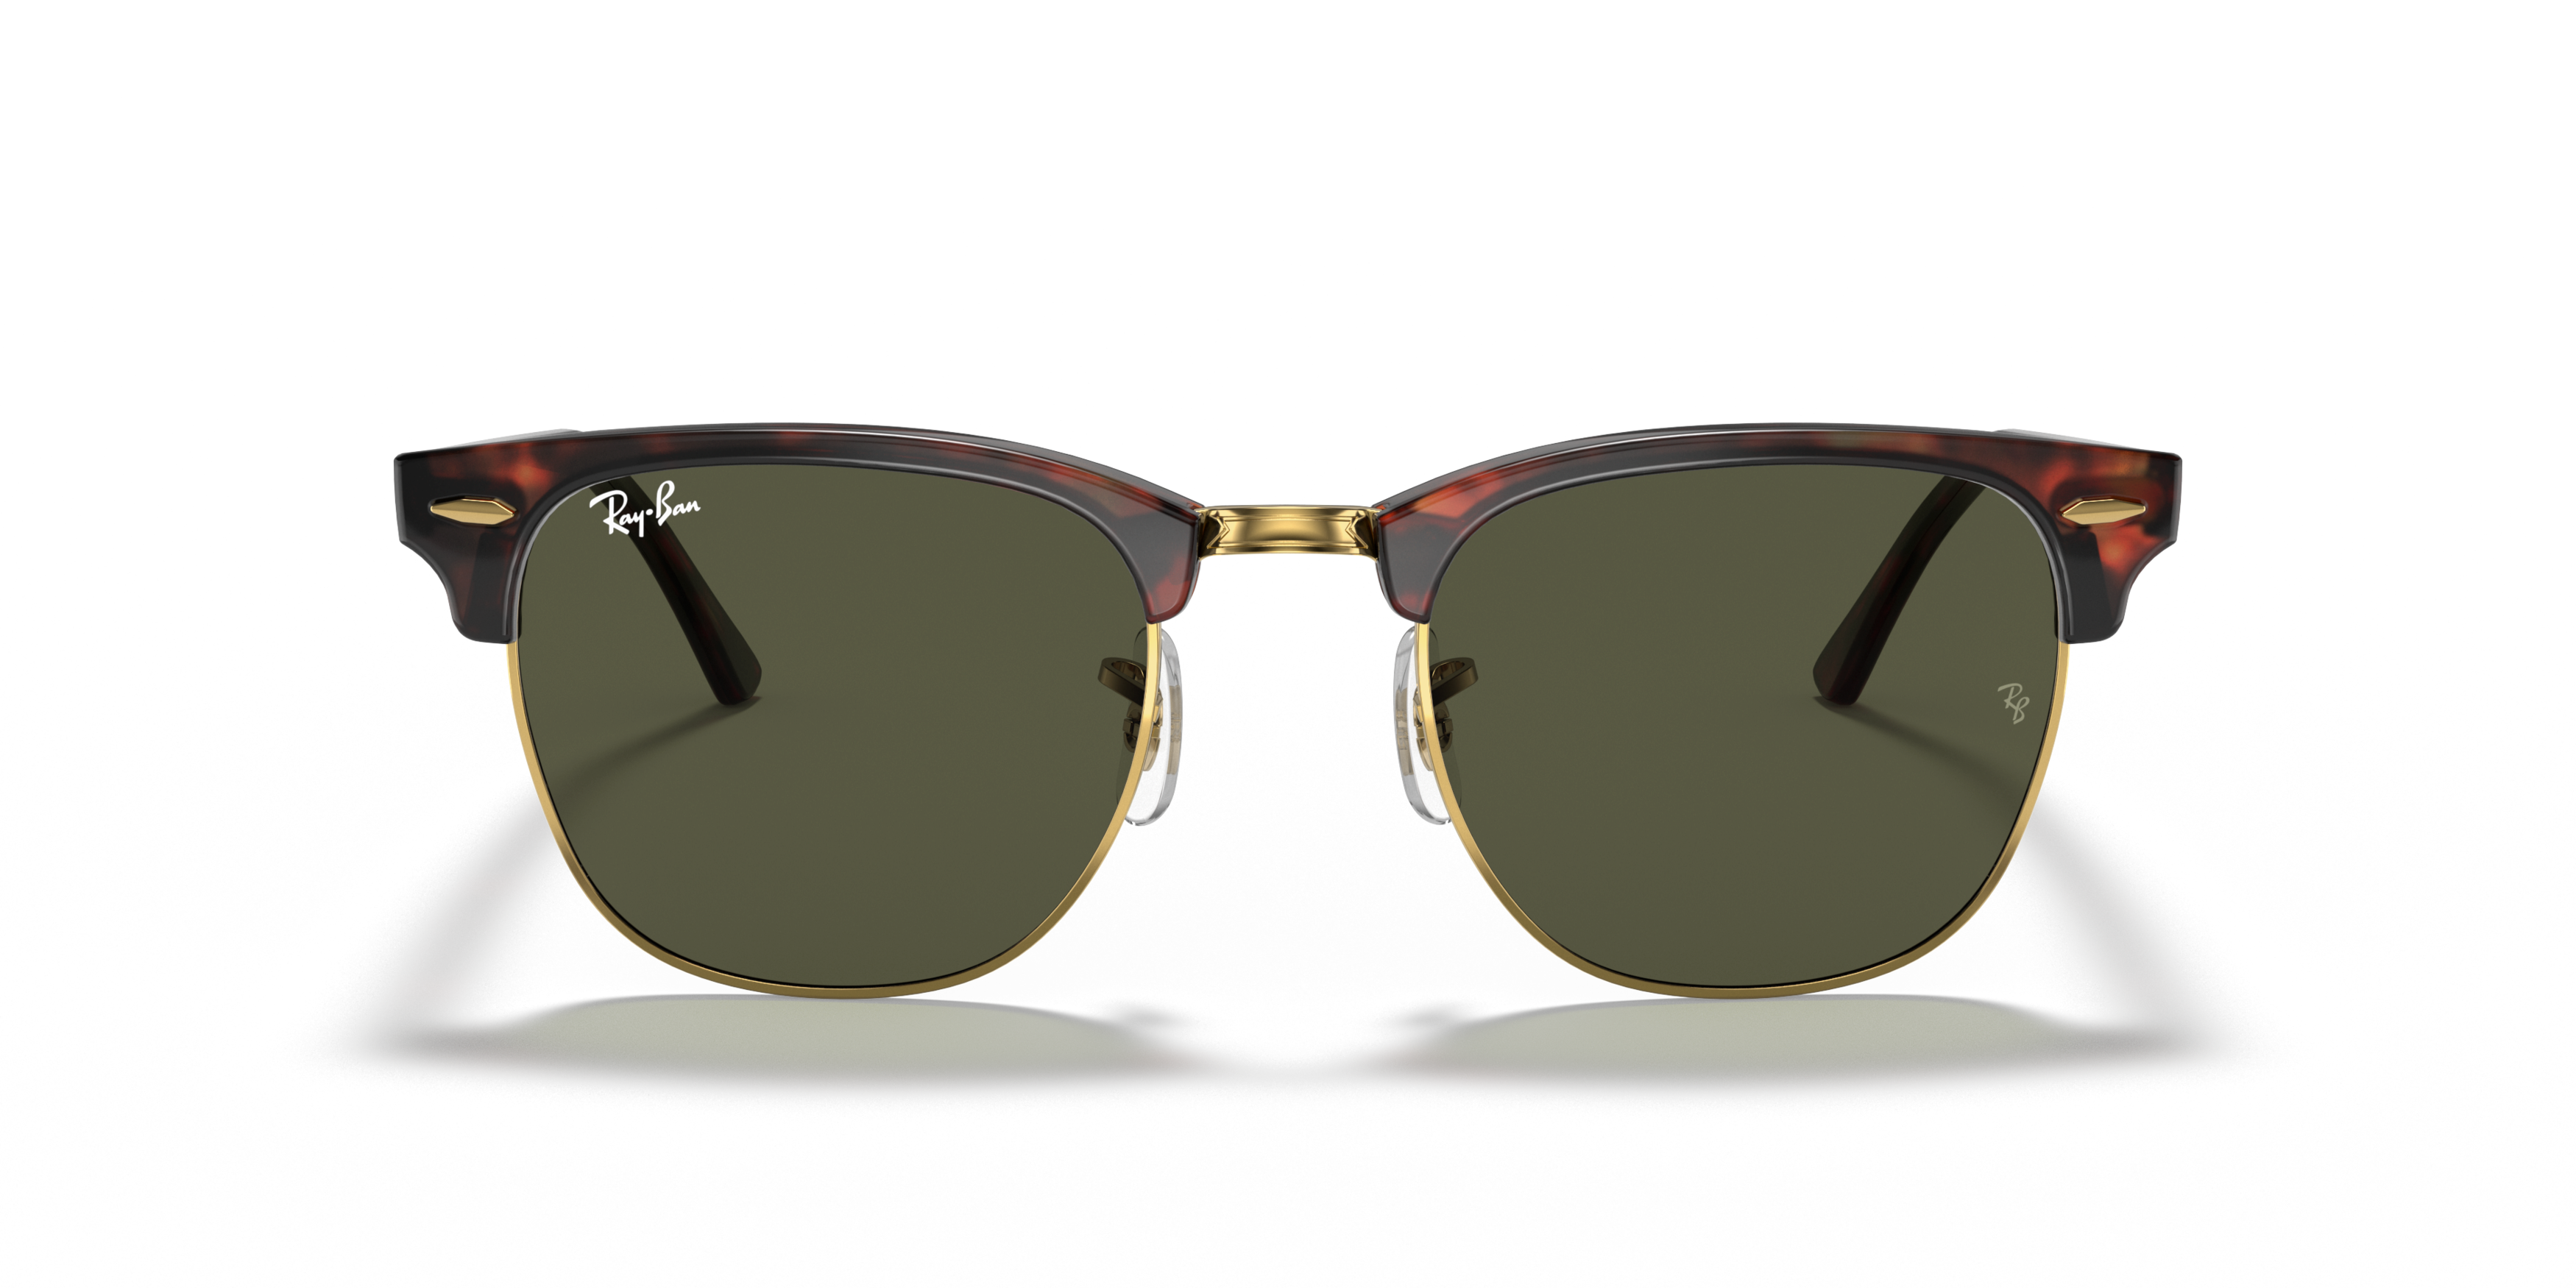 [products.image.front] Ray-Ban CLUBMASTER W0366